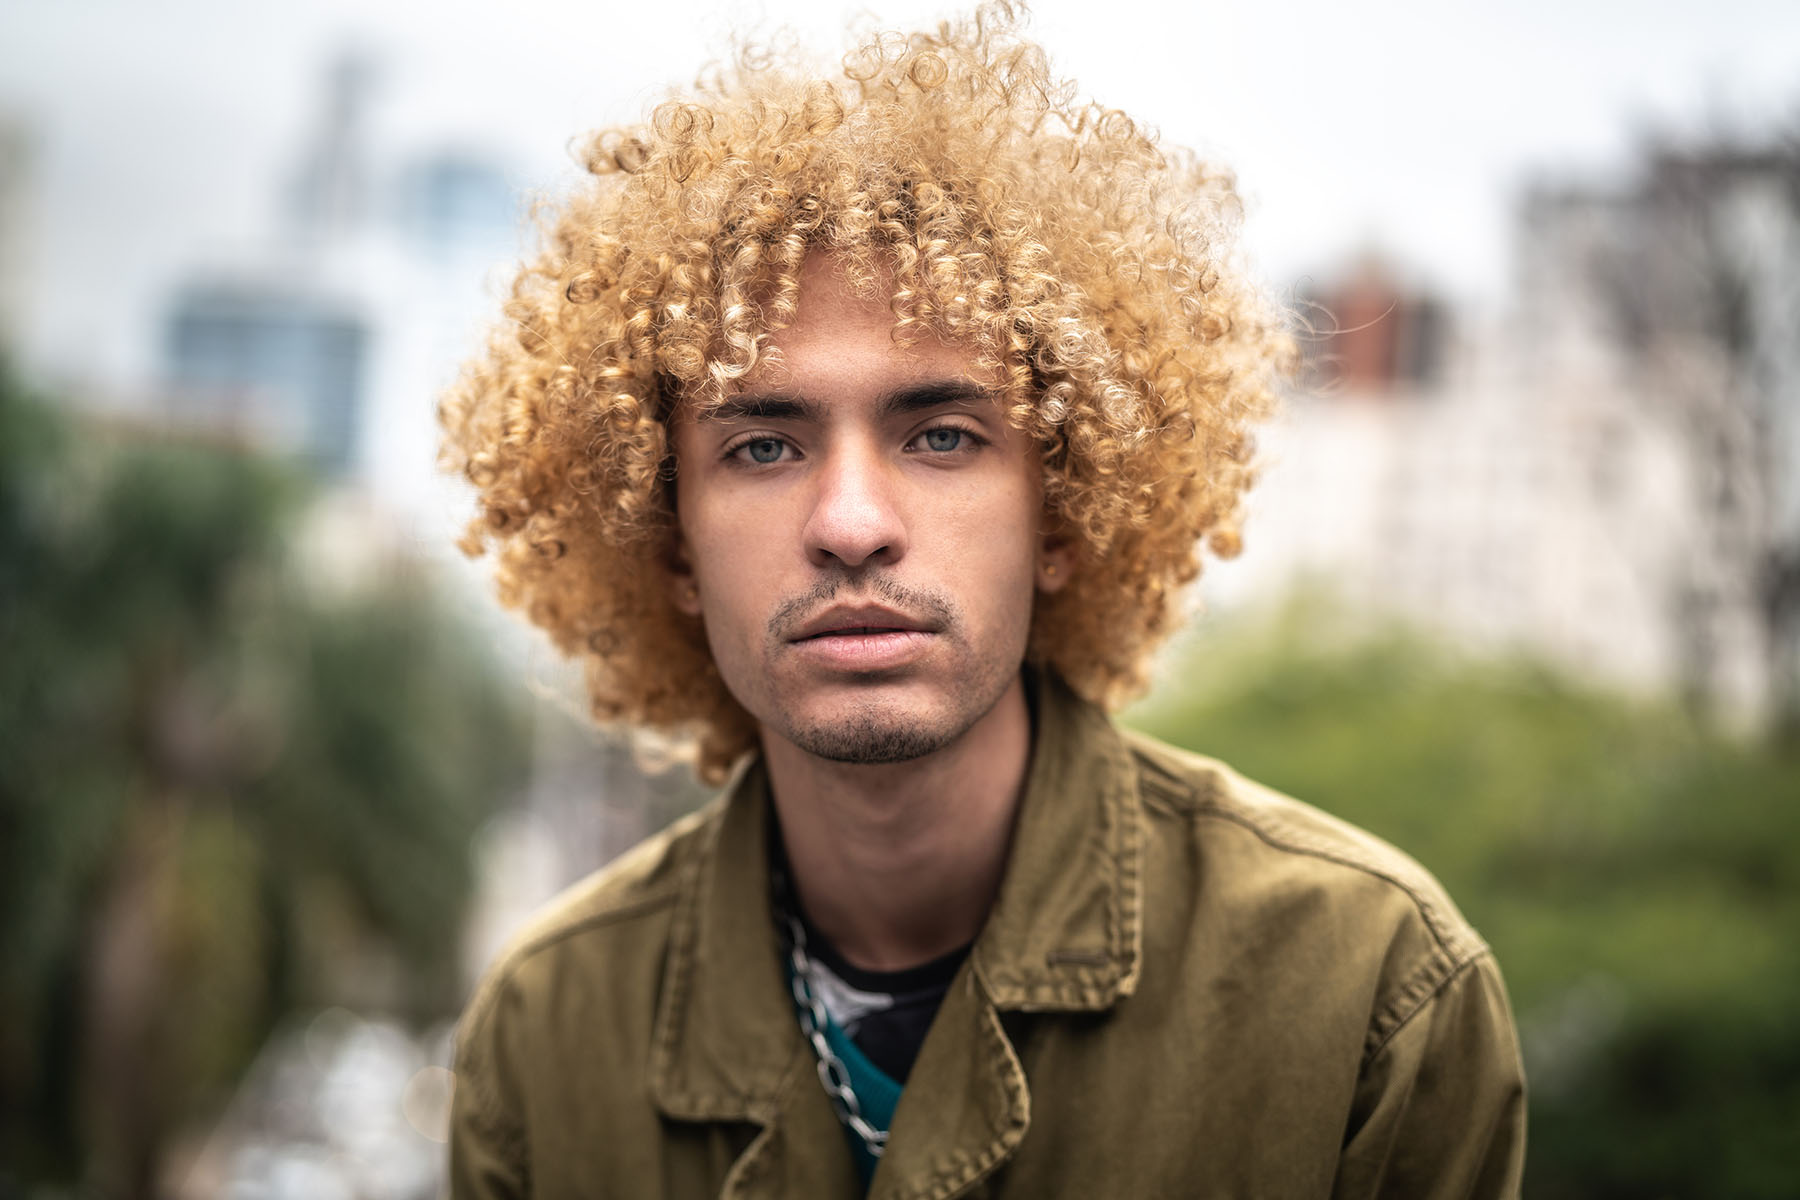 Fashionable Men with Curly Hair Portrait Alternative Lifestyle gay or bisexual men stock pictures, royalty-free photos & images